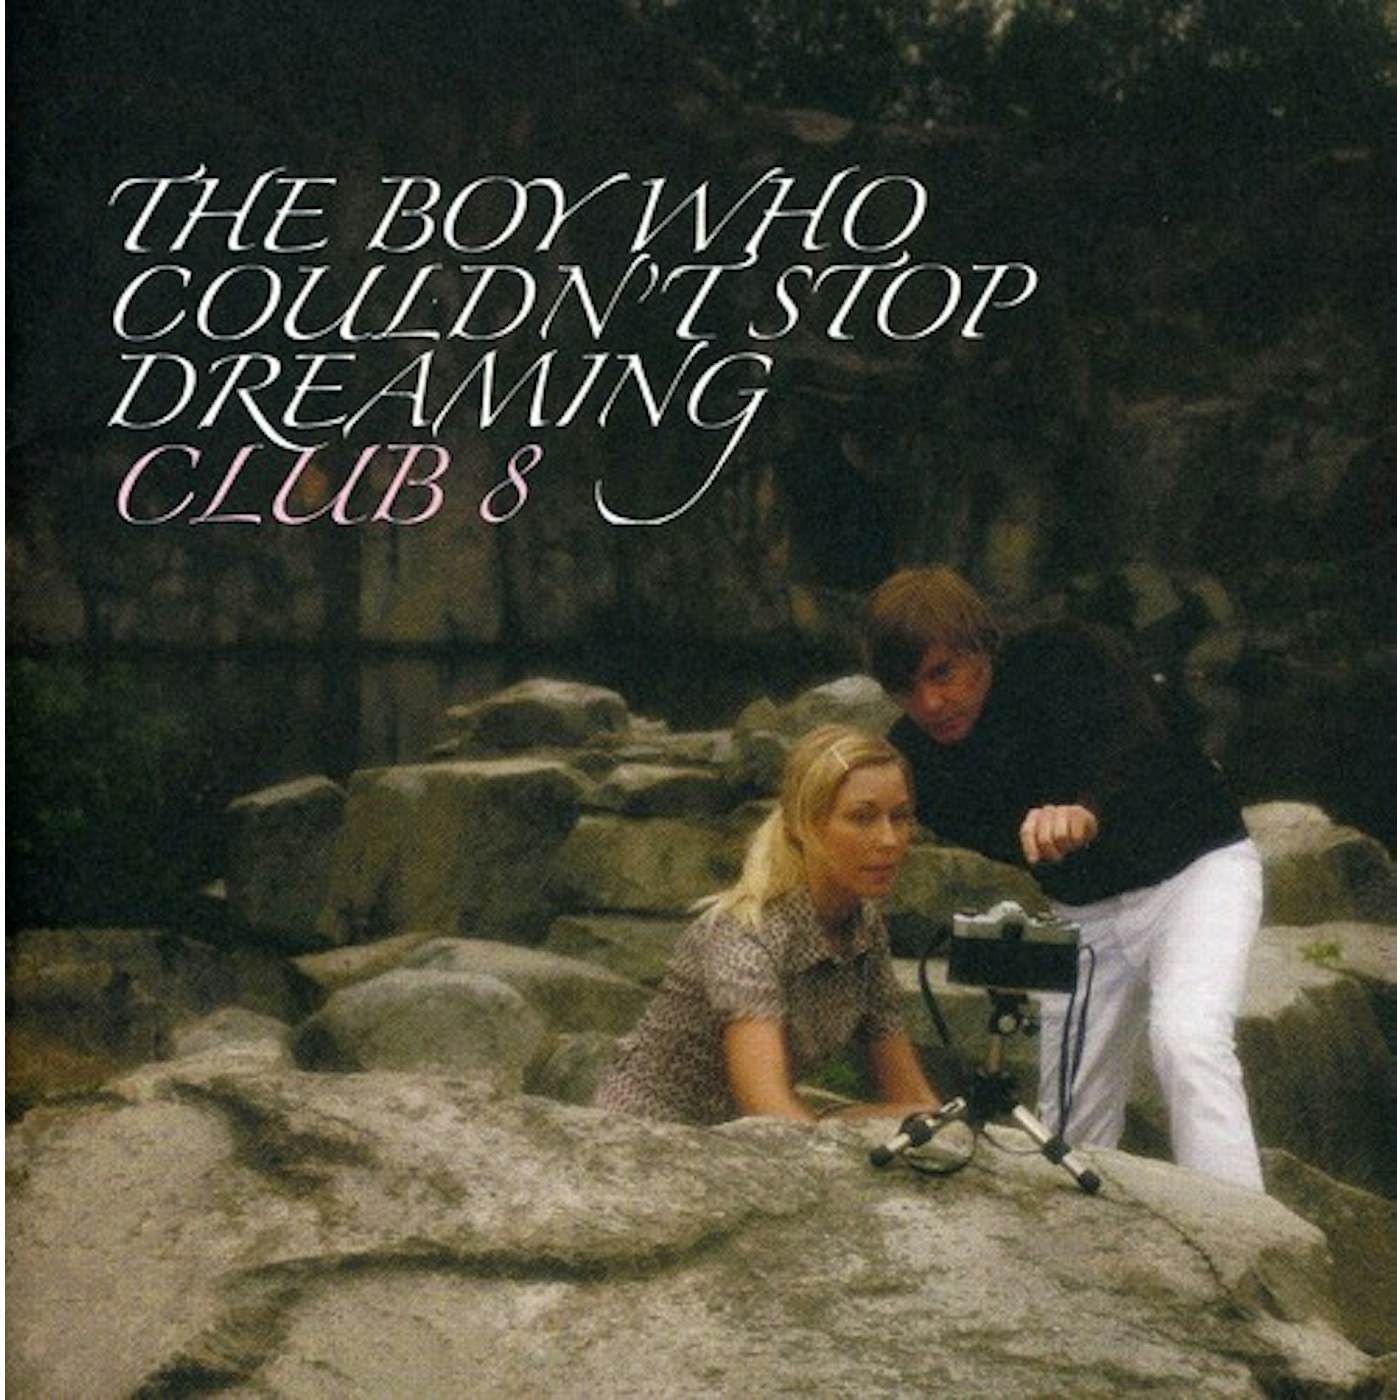 Club 8 BOY WHO COULDN'T STOP DREAMING CD